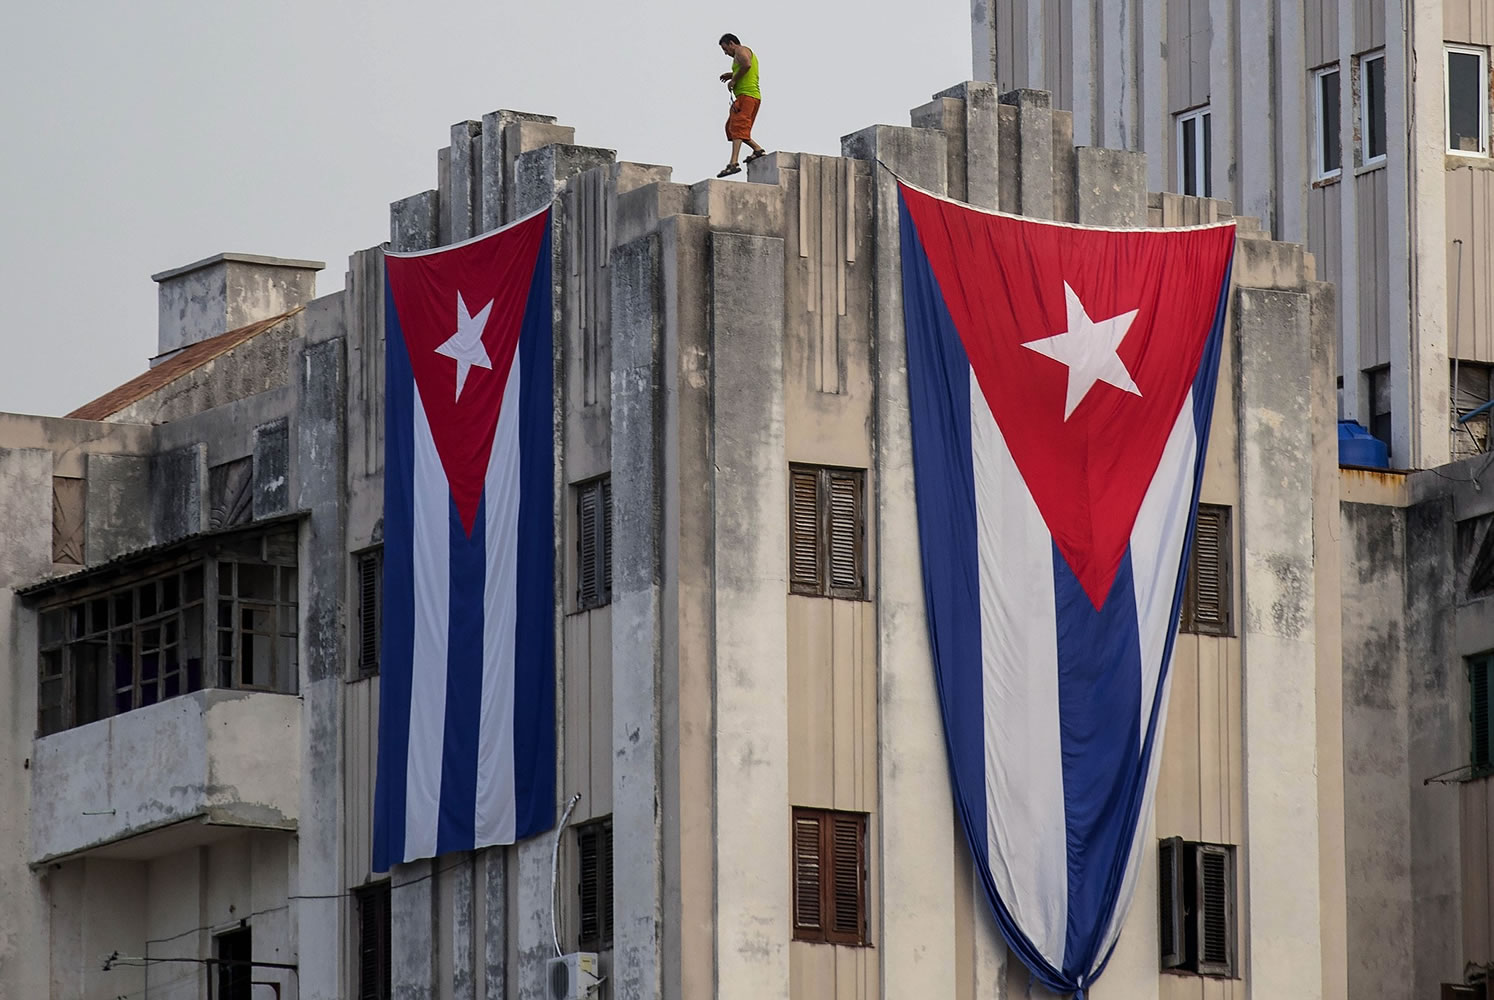 A man walks along the ledge of a building after hanging two giant Cuban flags, next to the U.S.